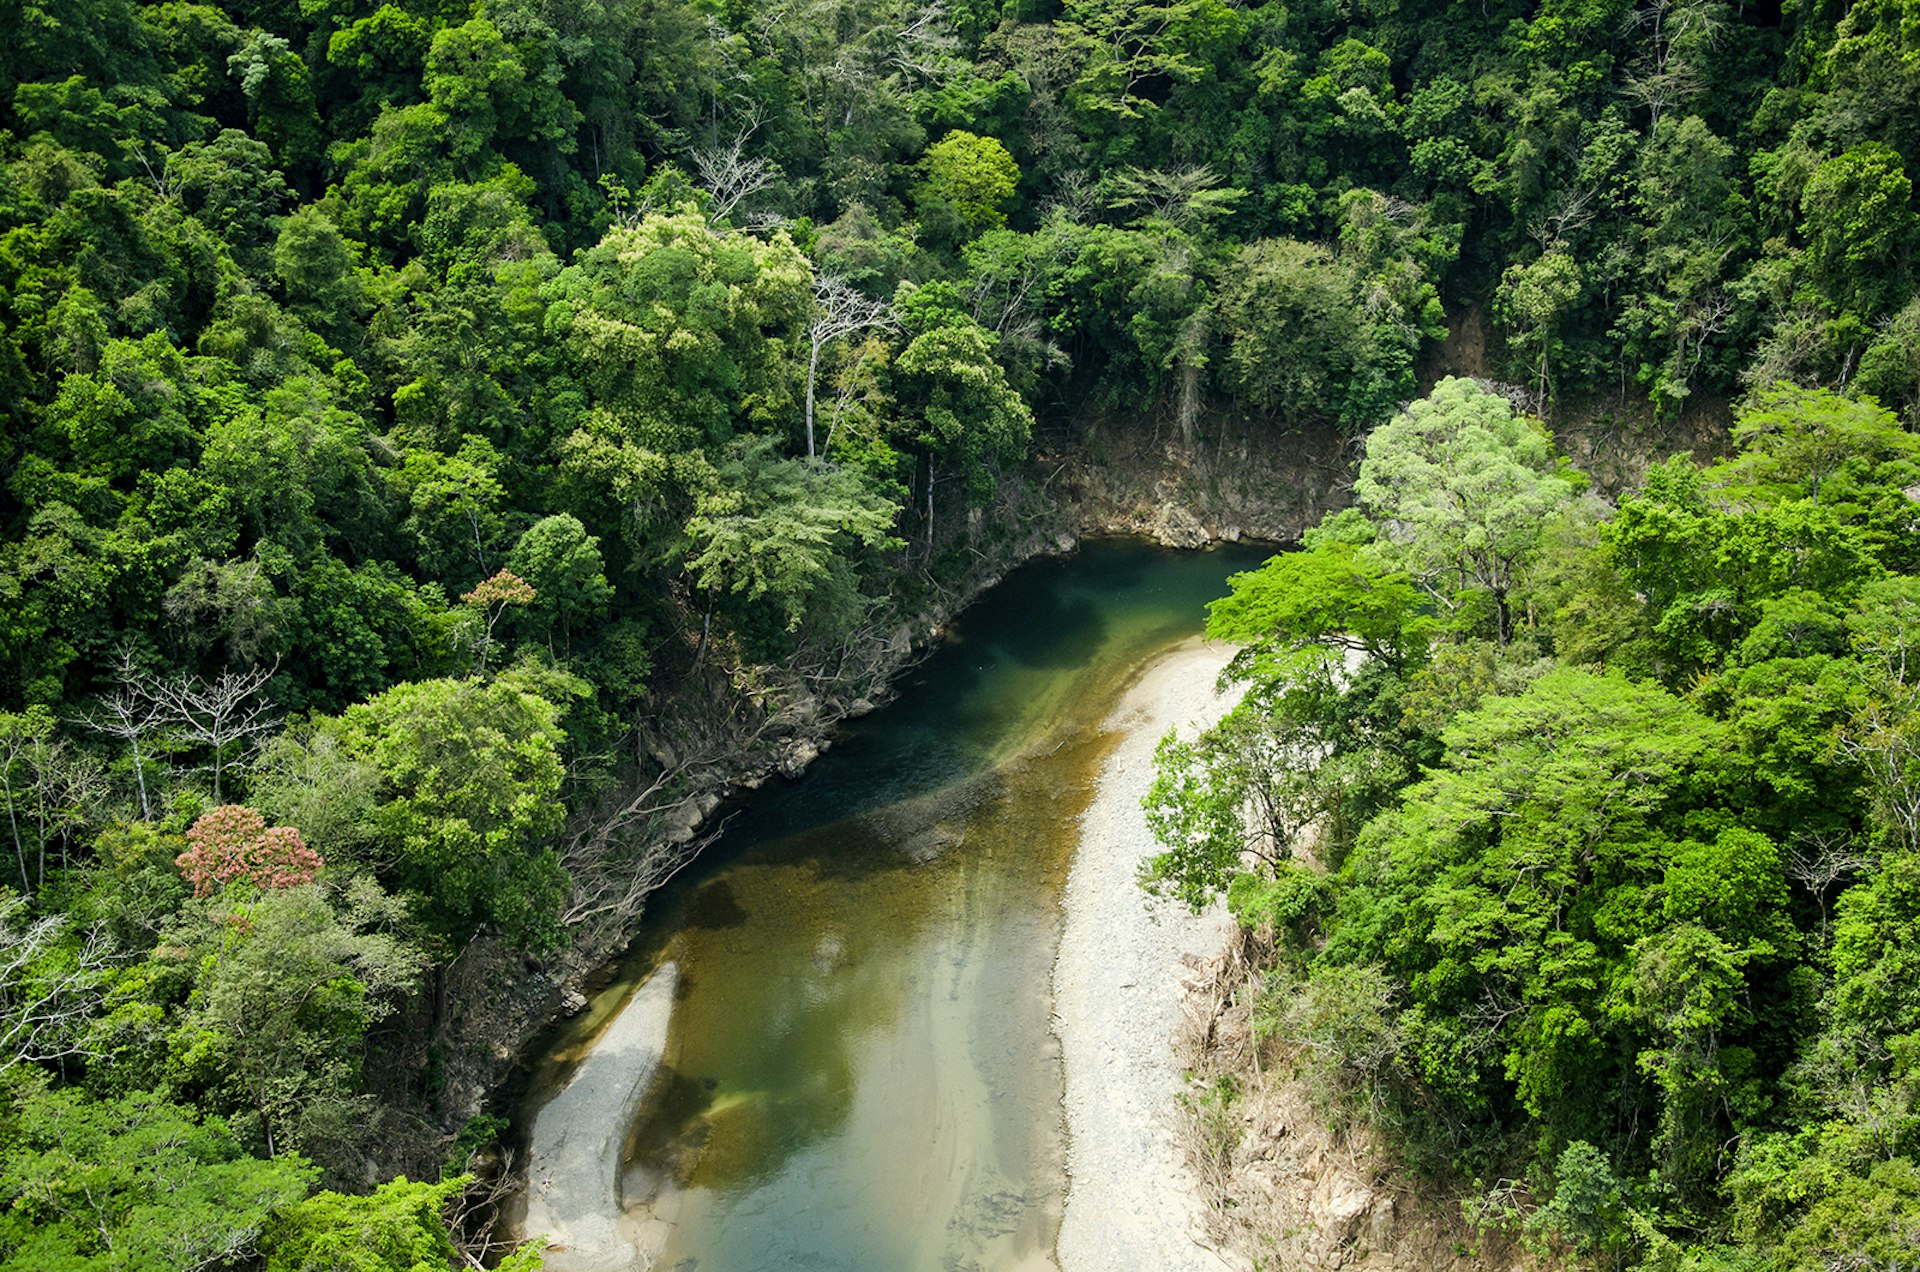 Features - Chagres river bed and rainforest.